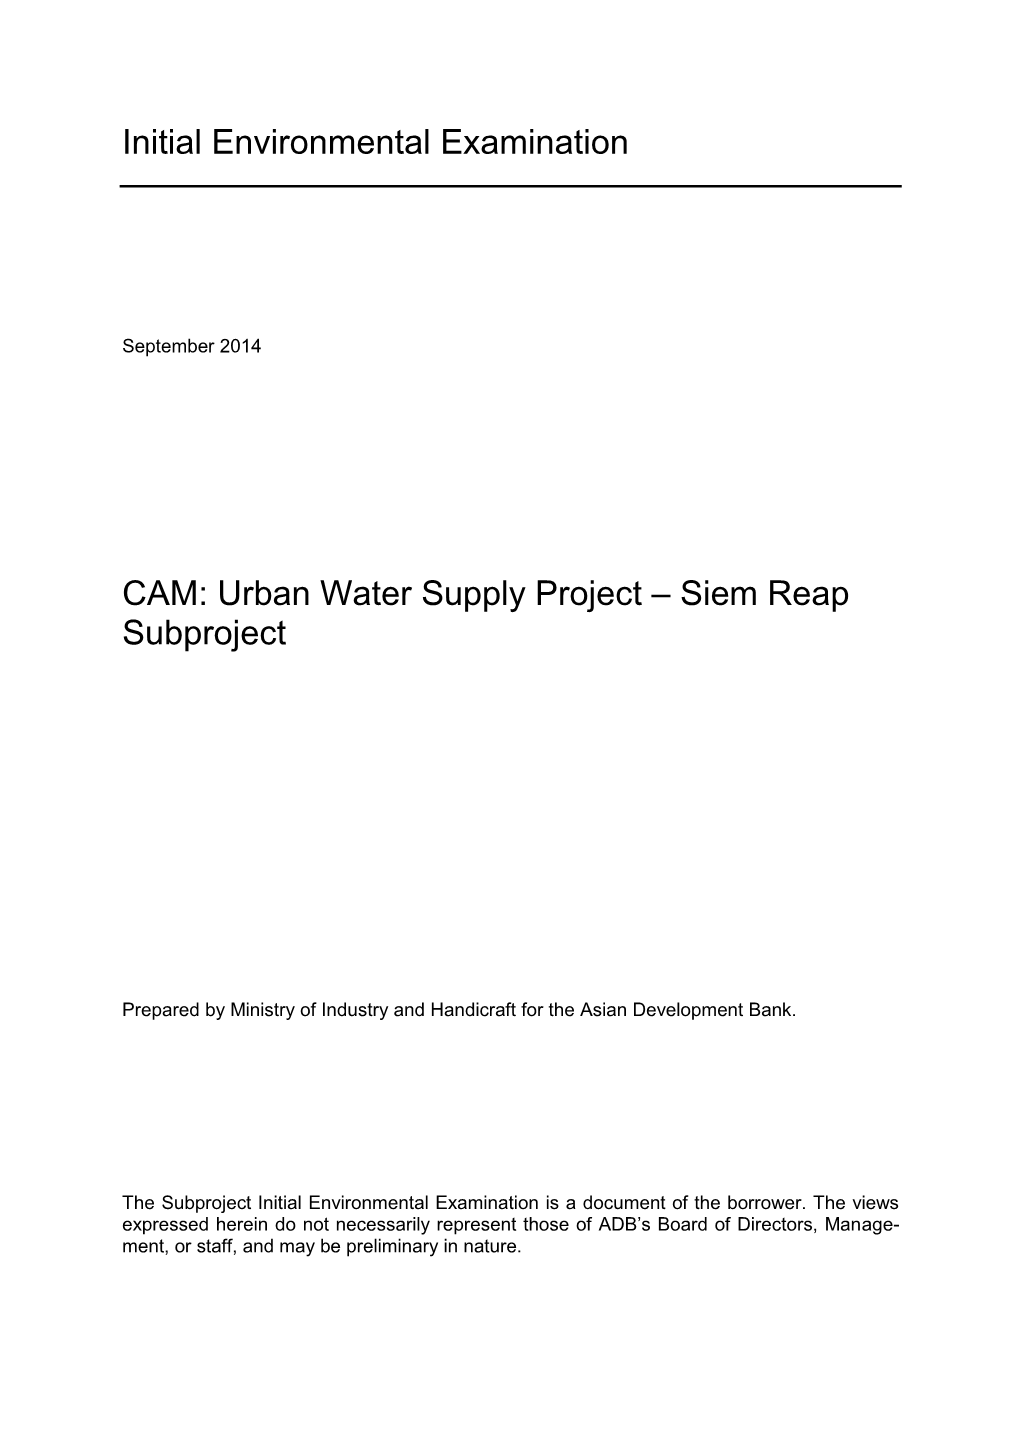 Urban Water Supply Project: Siem Reap Subproject